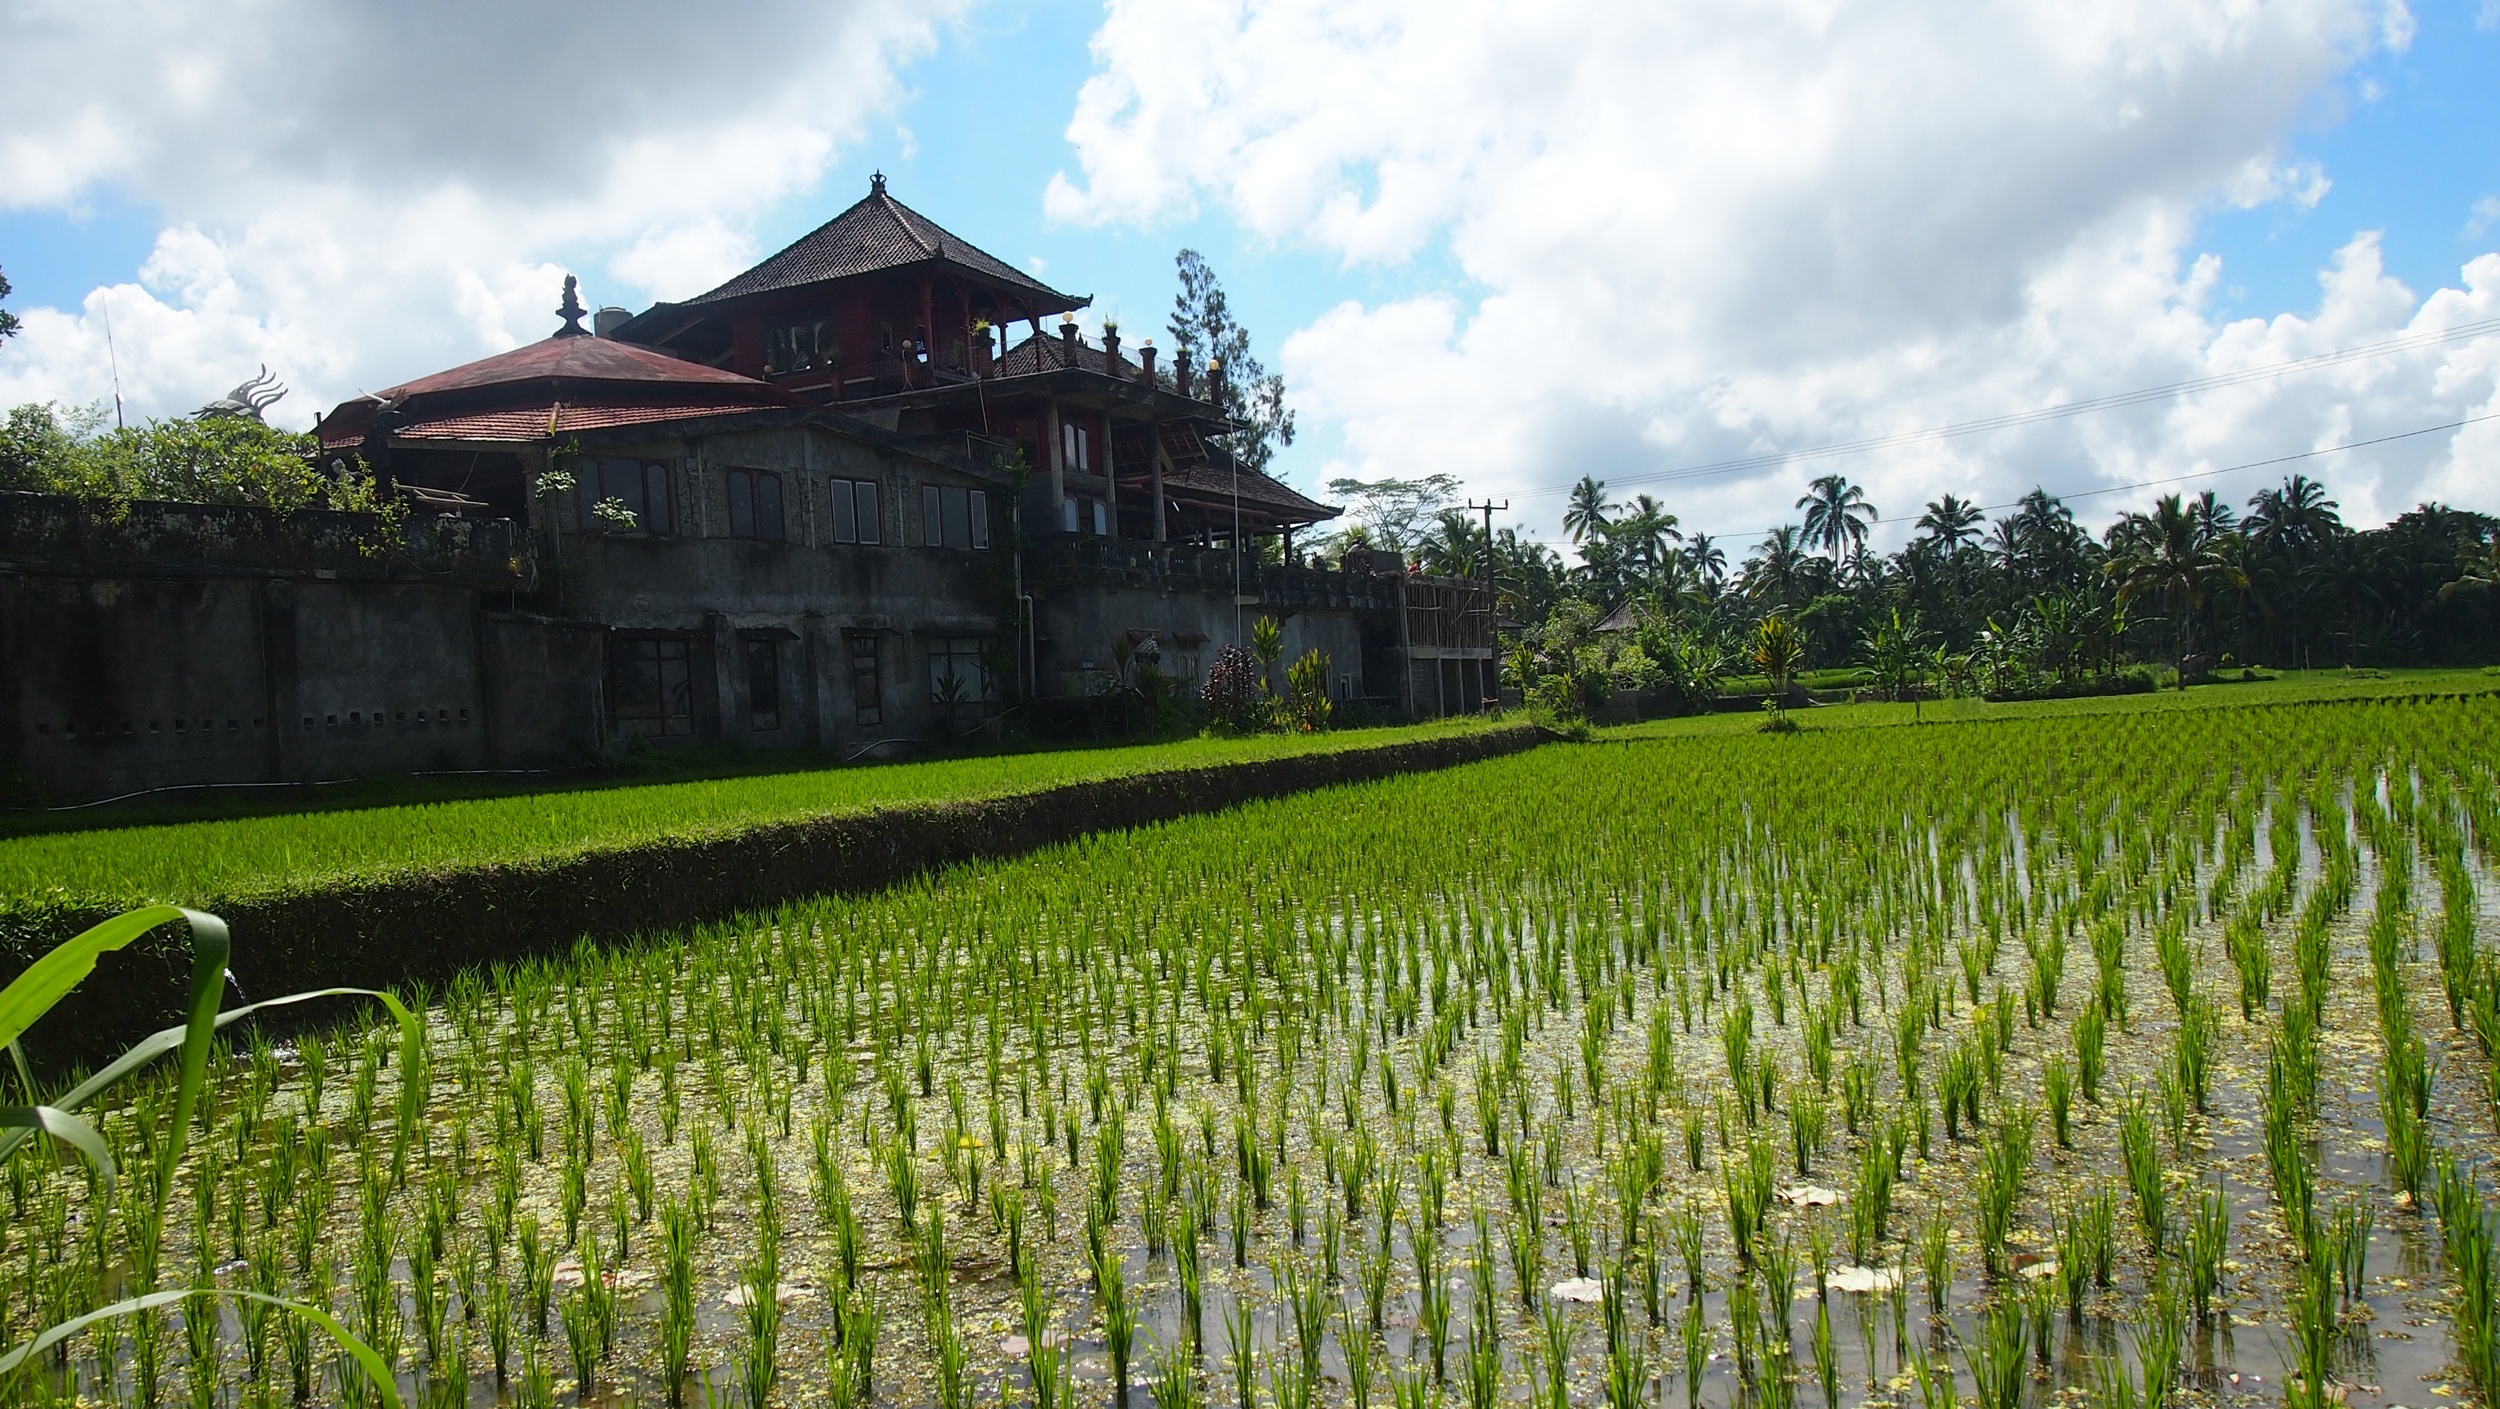 Getting lost in the rice paddies of Tegalalang